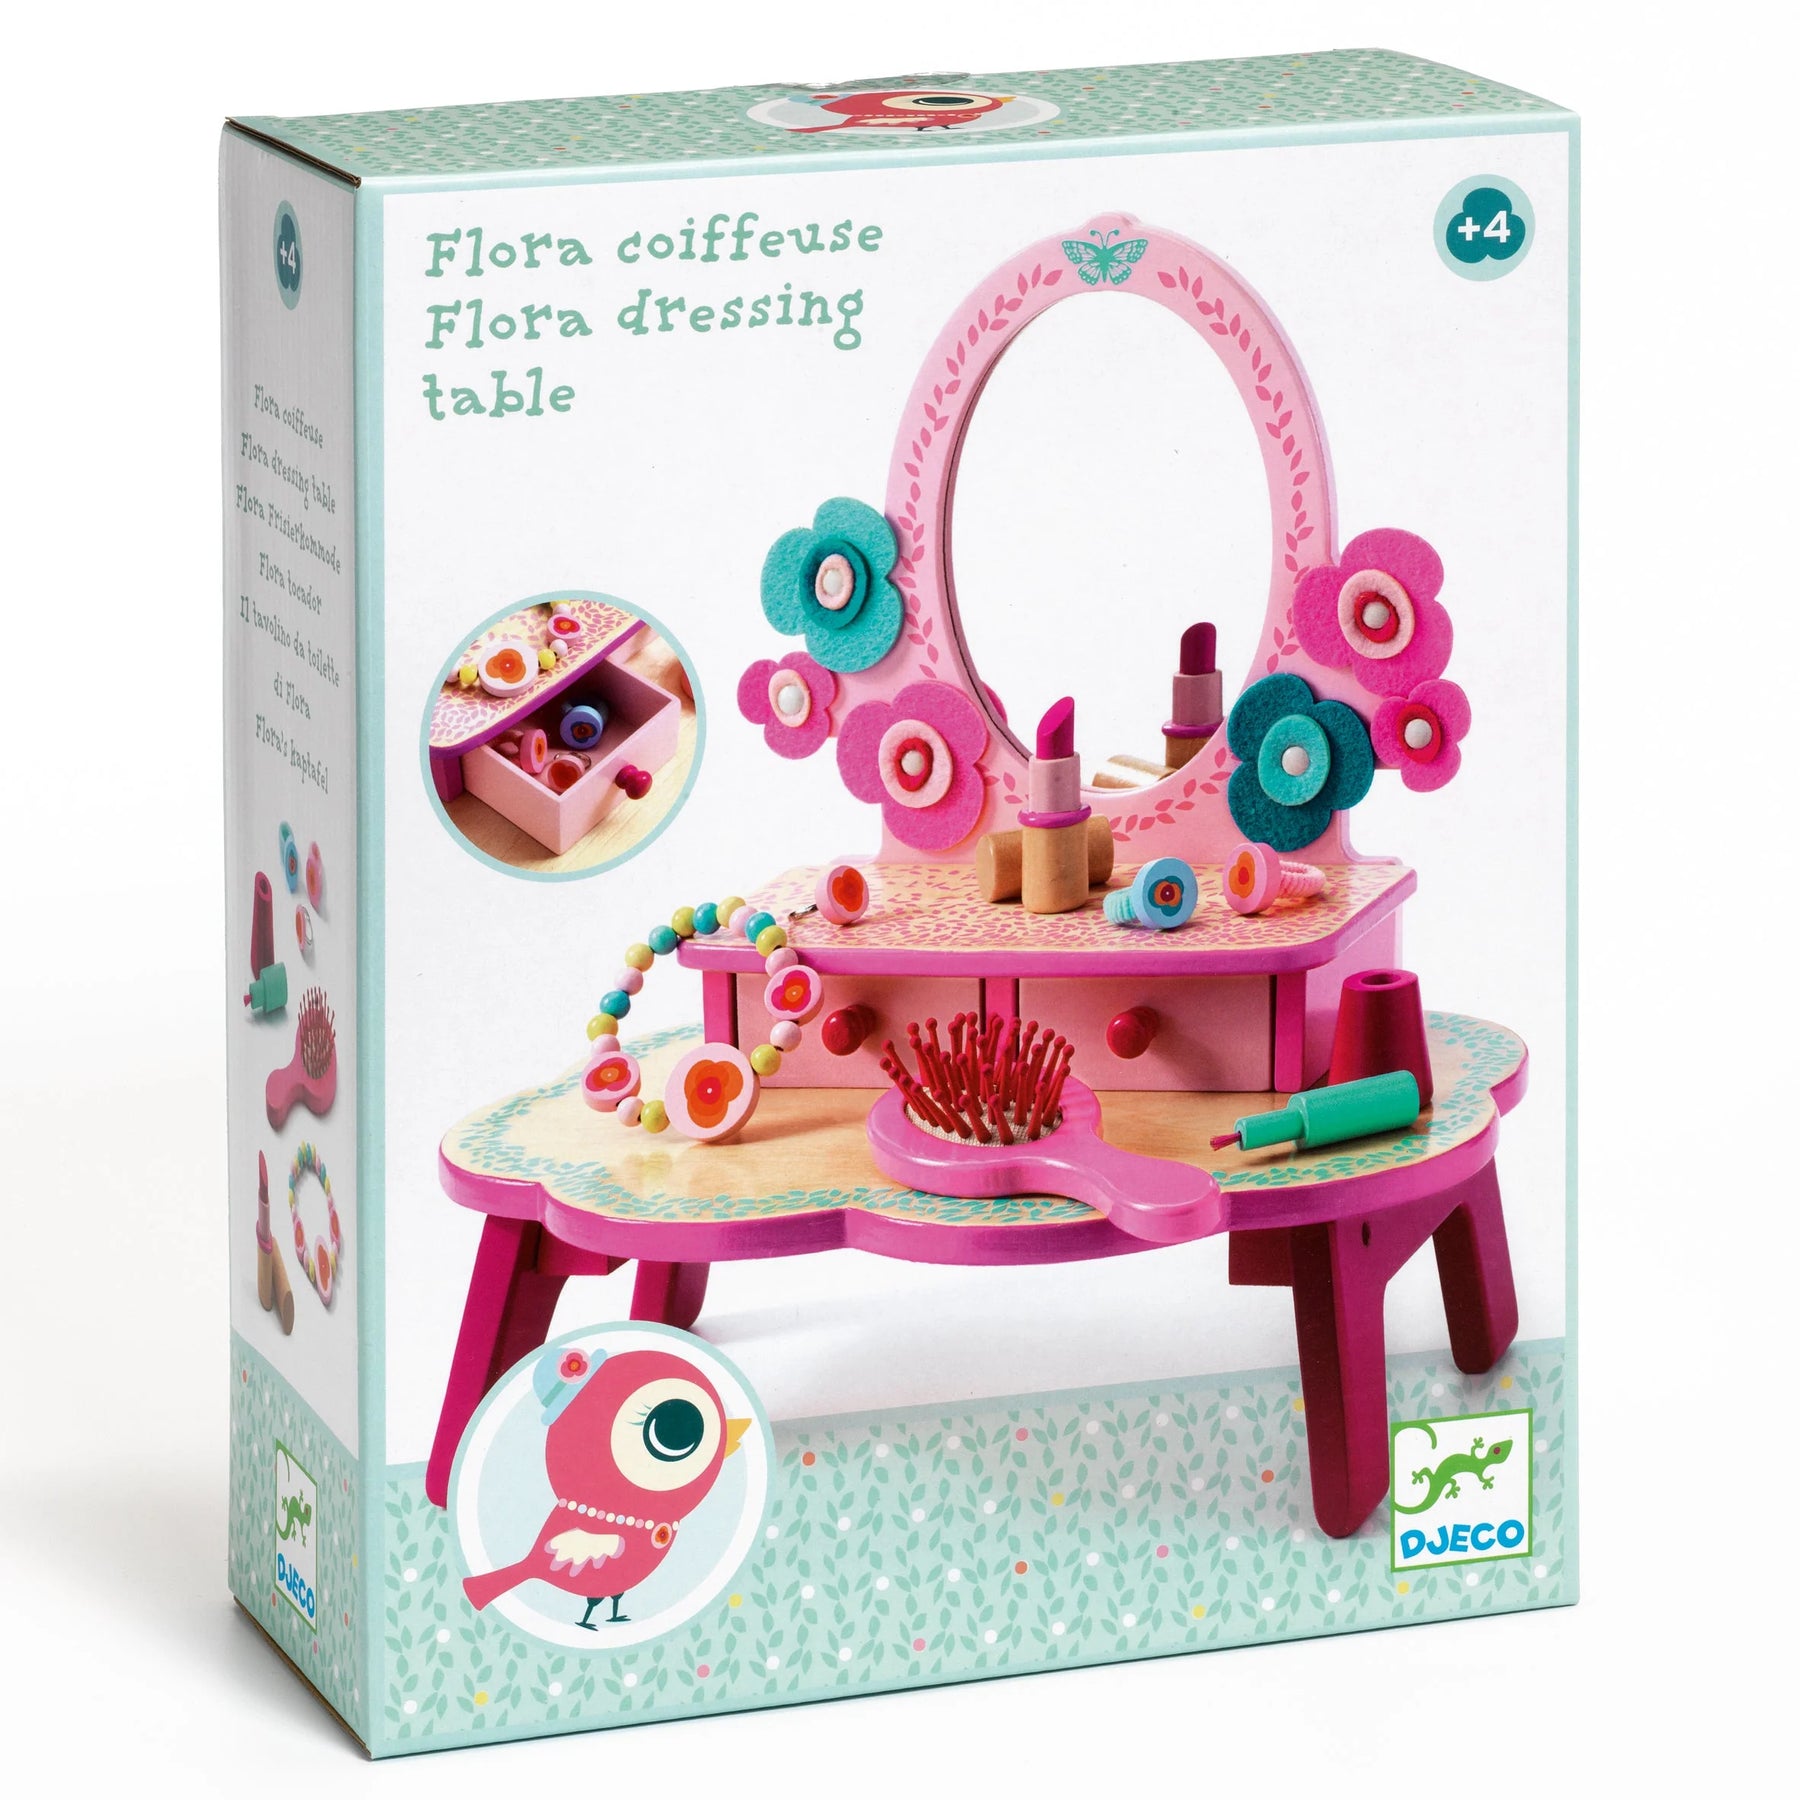 Djeco Flora Dressing Table Roleplay Set